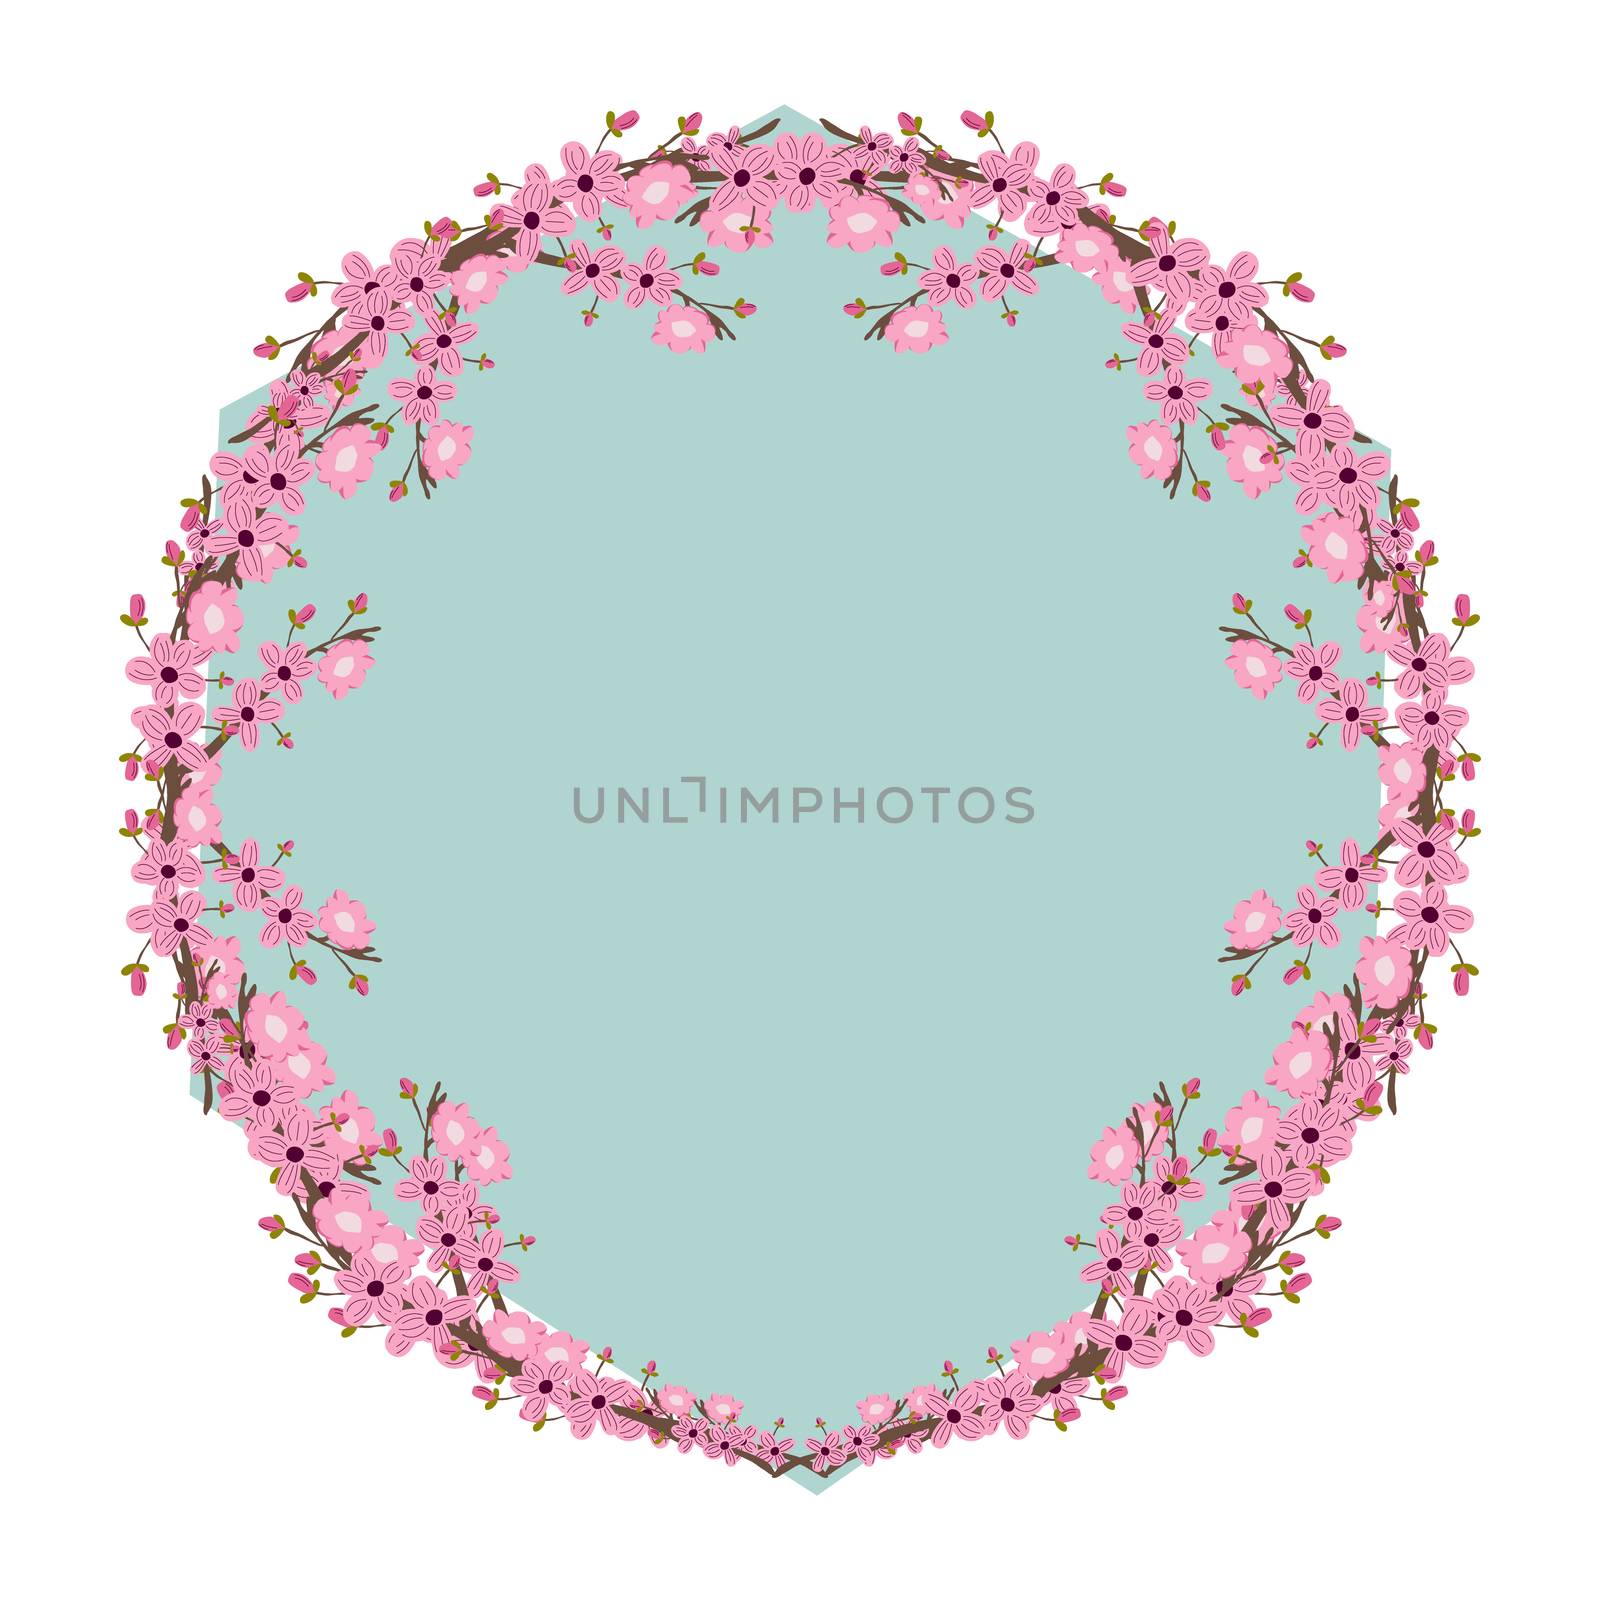 Round frame with pink cherry blossom flowers. Floral circle with space for text. Vector illustration